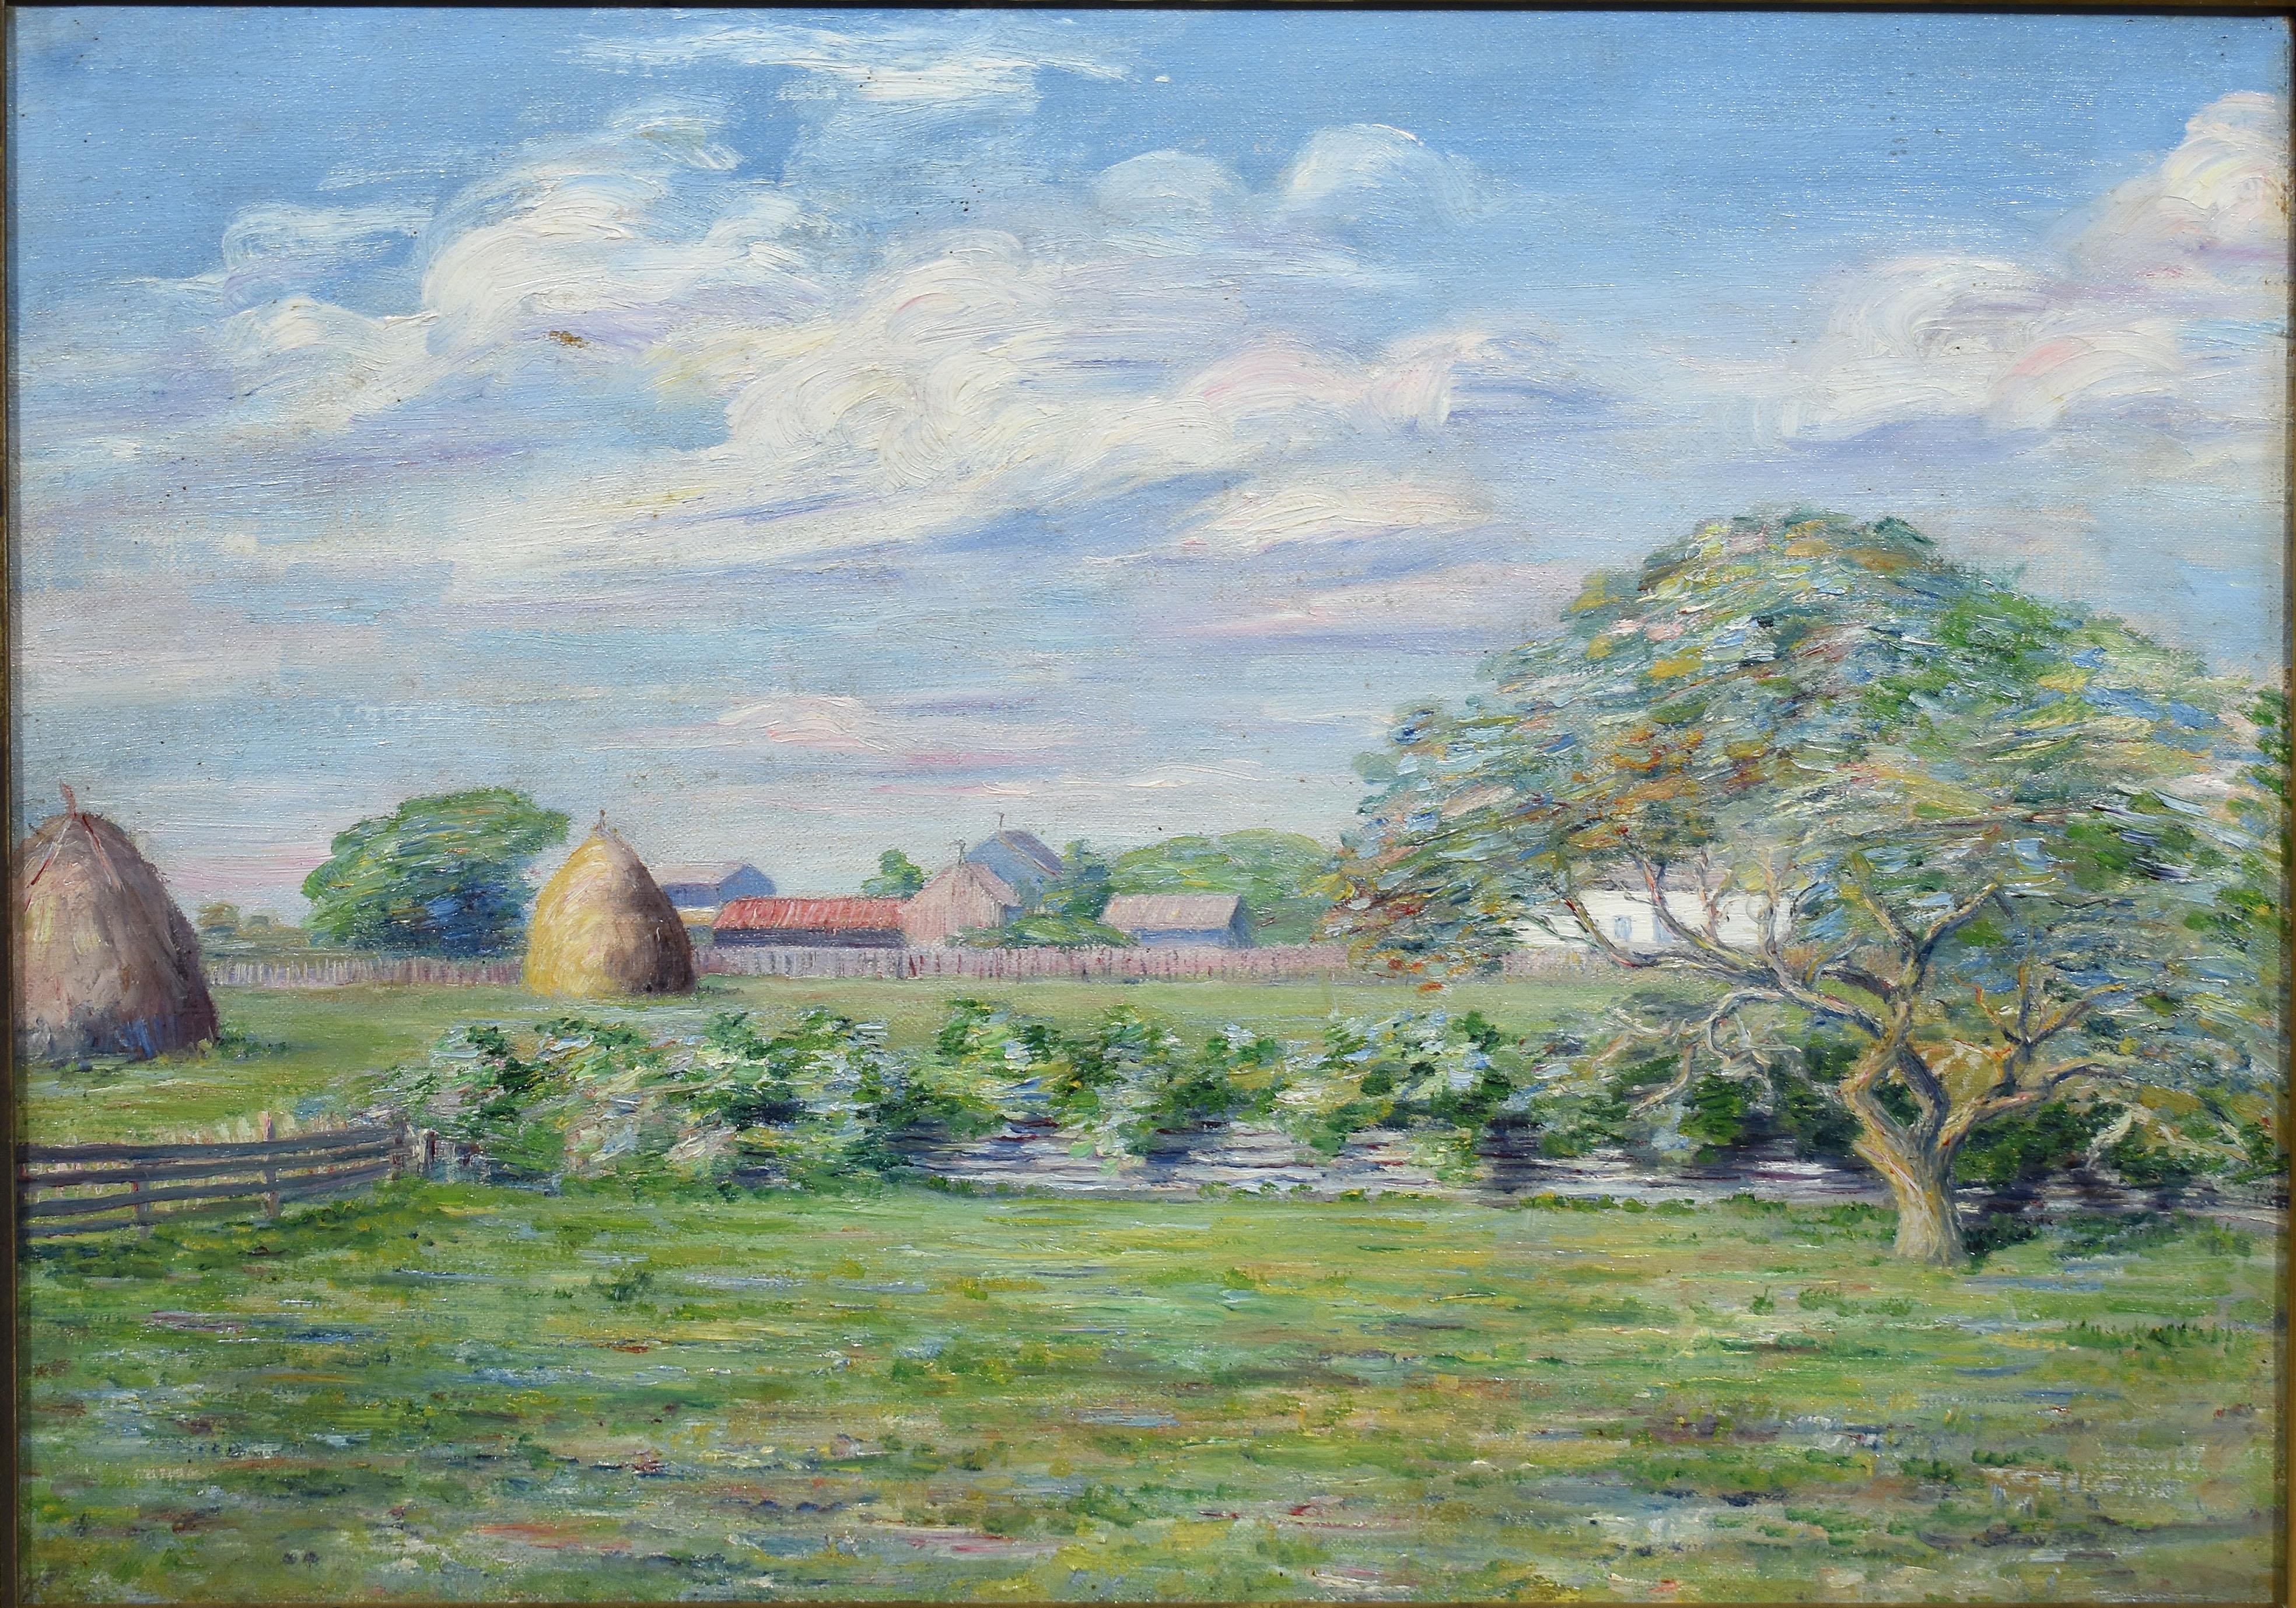 Impressionist Landscape Oil Painting of a Farm by Lucy Hariot Booth 1